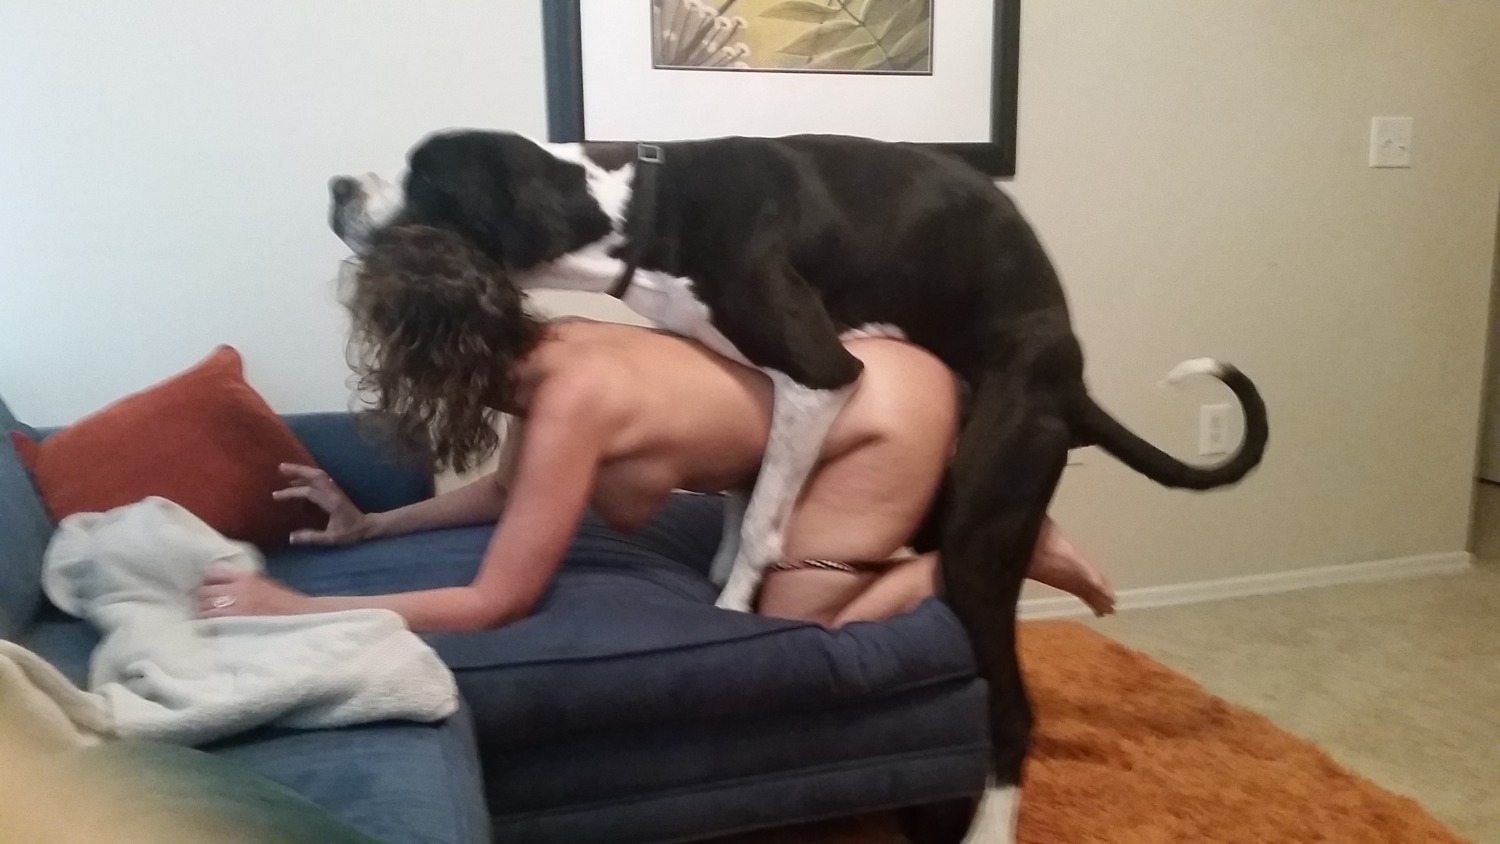 Dog in woman porn